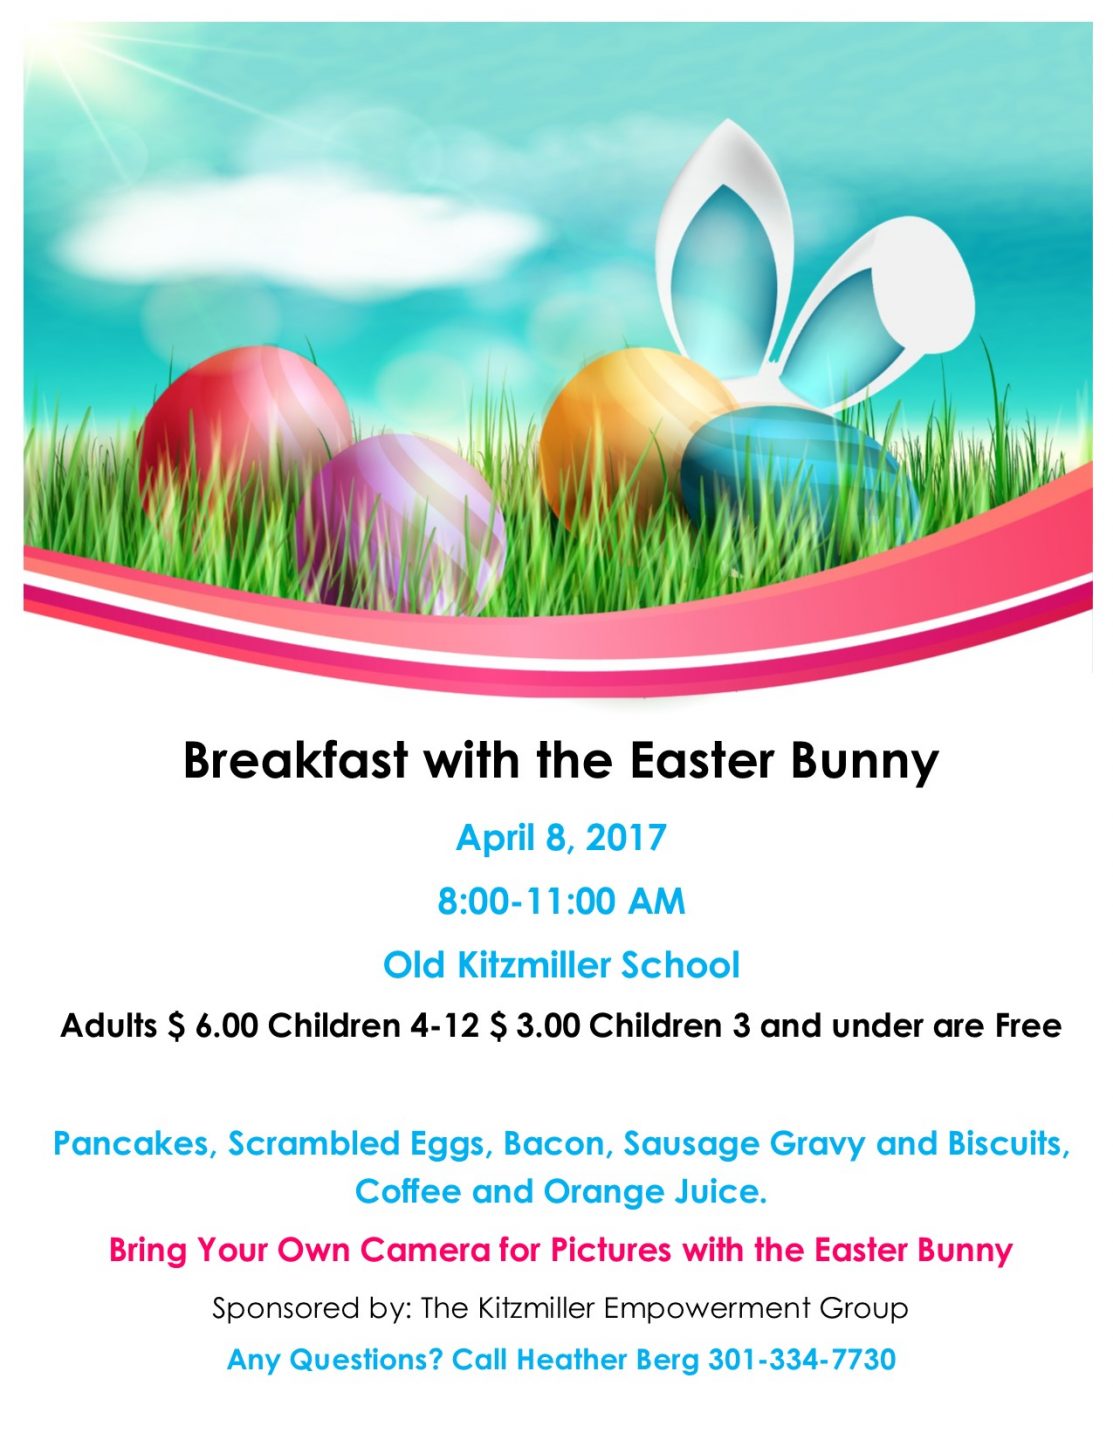 Breakfast with the Easter Bunny 2017